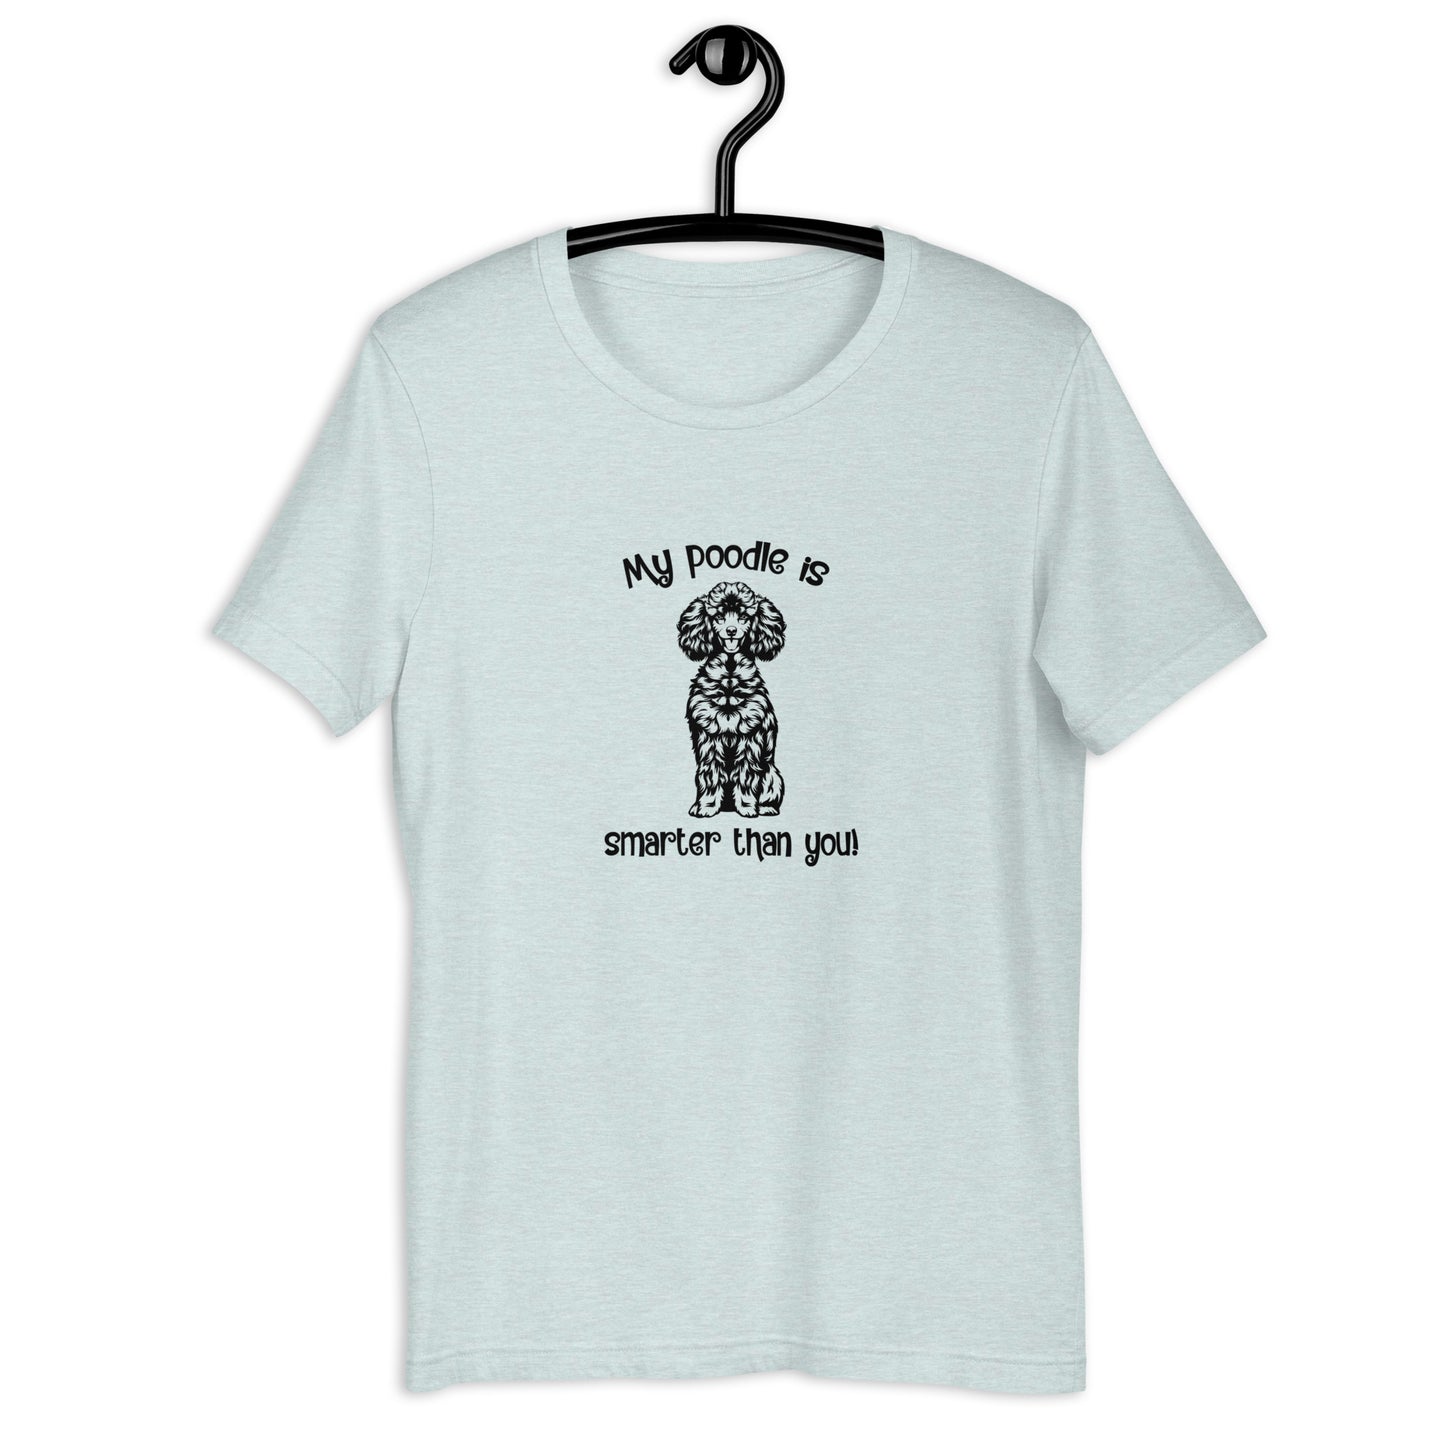 MY POODLE IS SMARTER THAN YOU  -  Unisex t-shirt